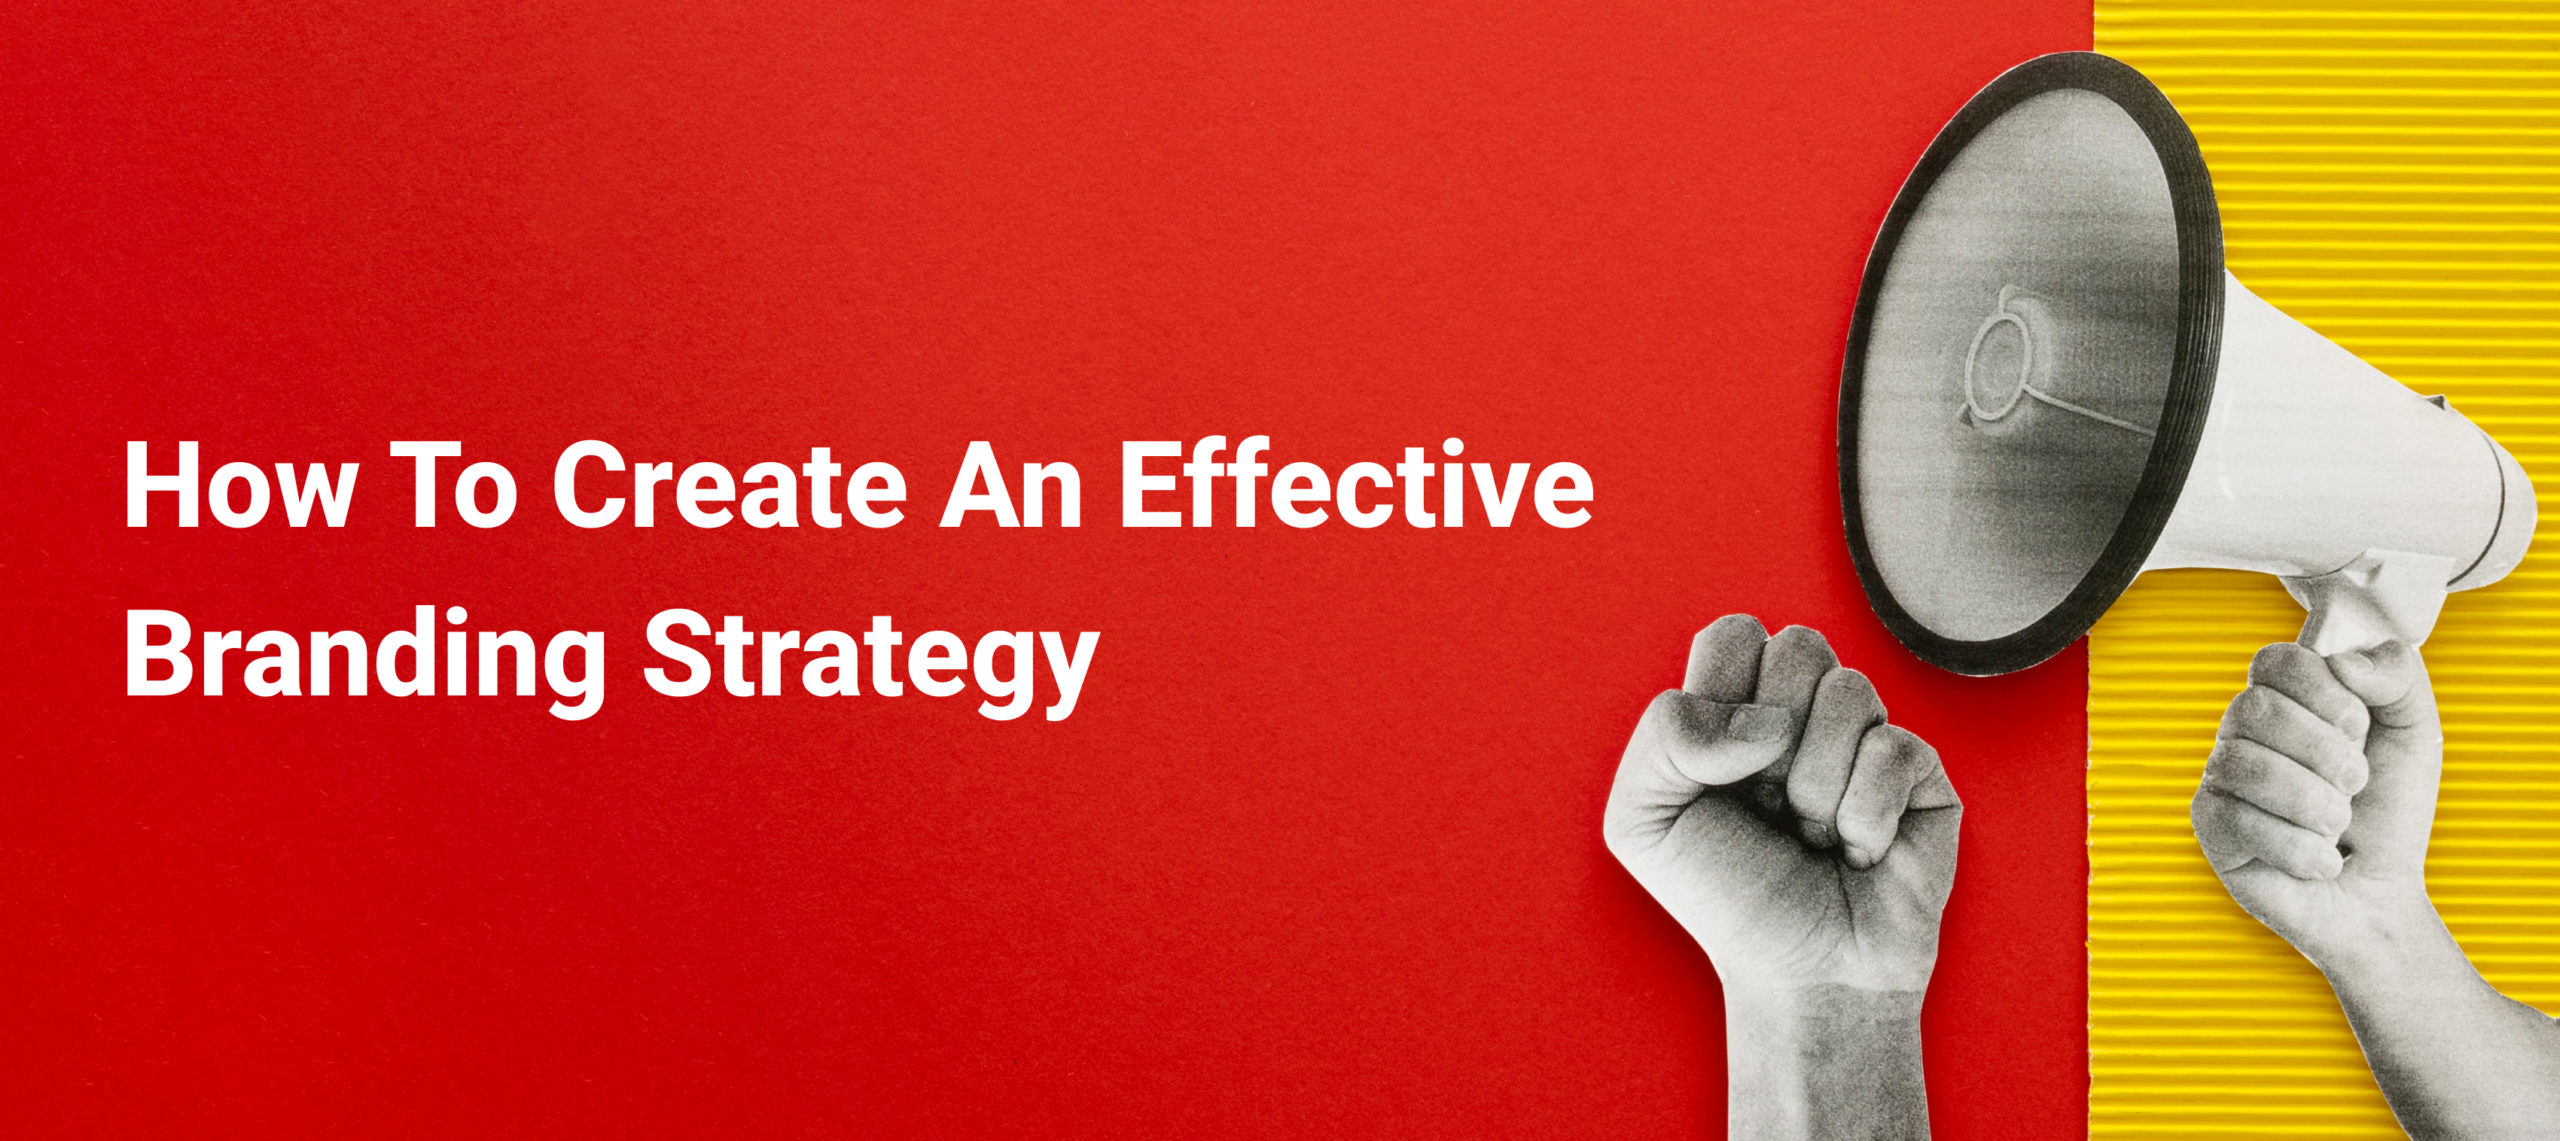  How To Create An Effective Branding Strategy For Your Business?